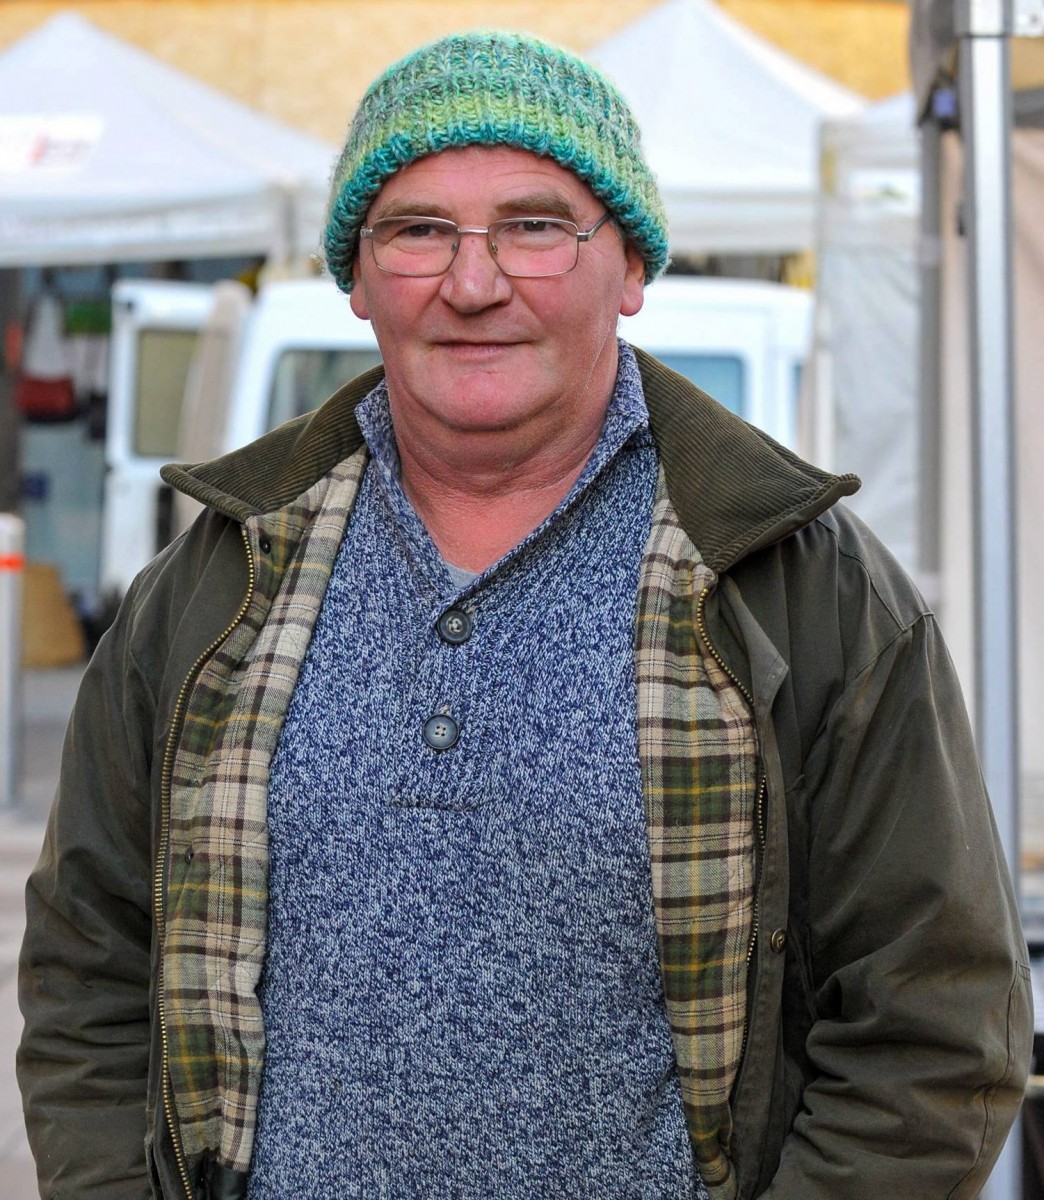 Workington resident and cheese seller Adrian McGreavy previosuly told HOAR that Jeremy Corbyn didn't represent the working man